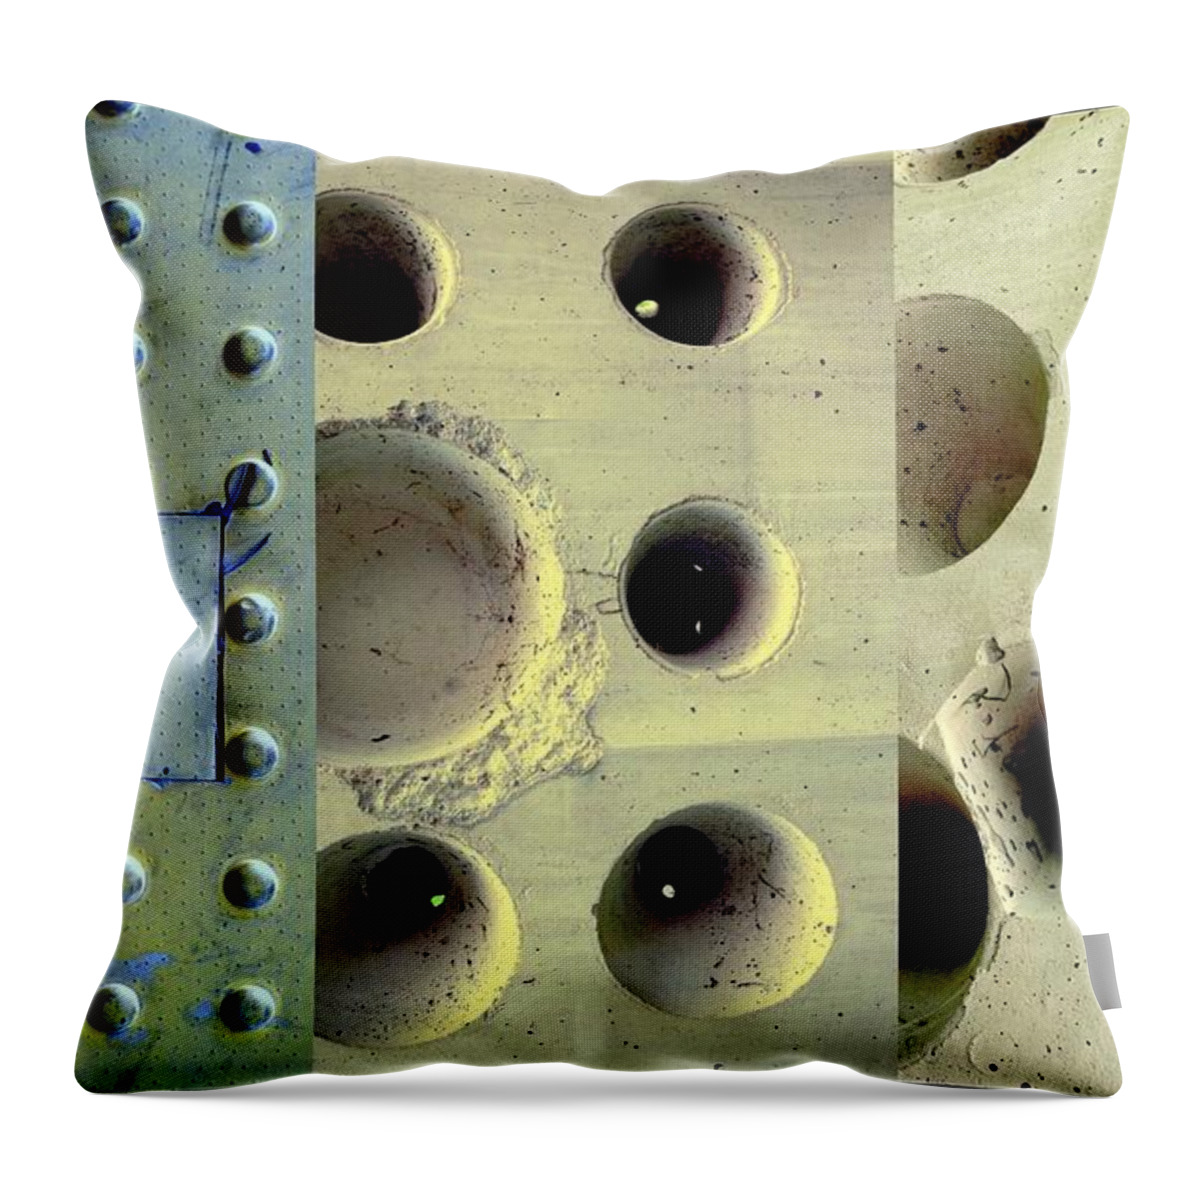 Holes Throw Pillow featuring the photograph Holey Wholes by Marlene Burns